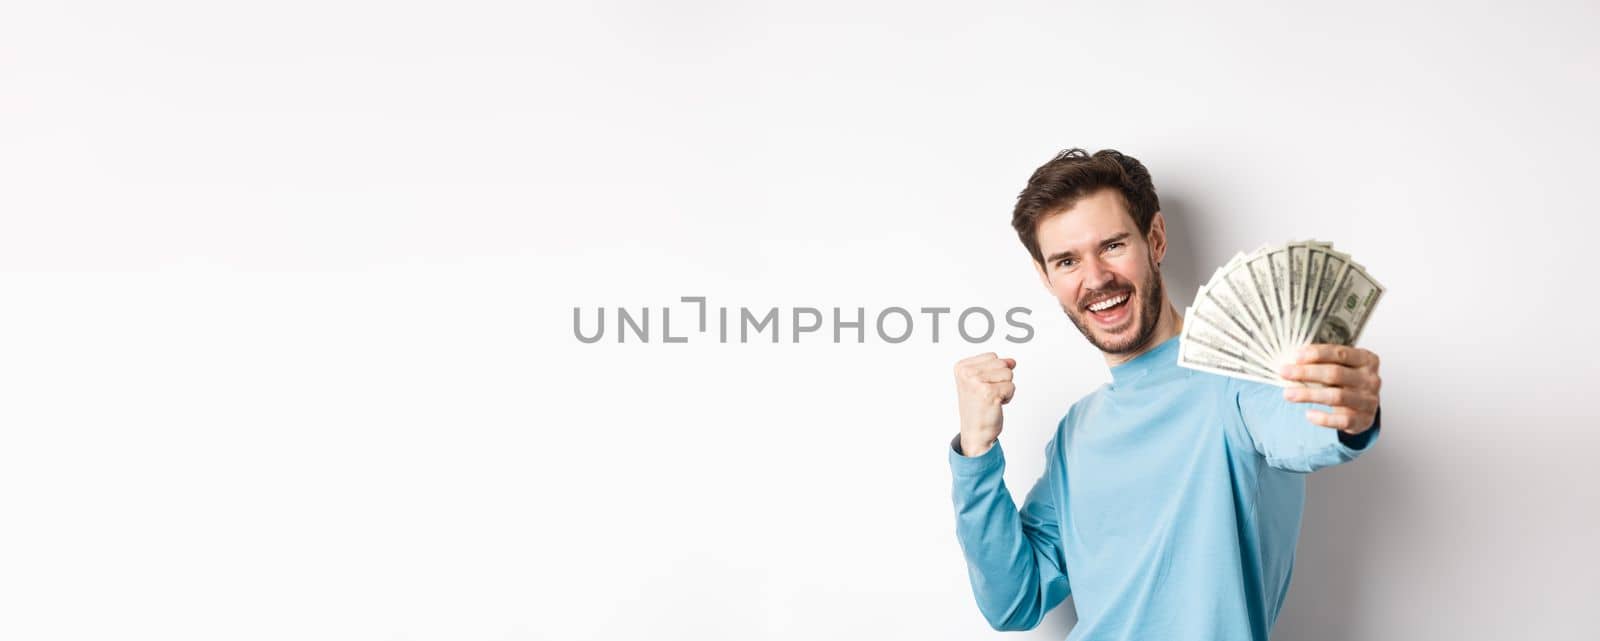 Happy caucasian man stretch out hand with money in dollars, saying yes and celebrating income, got cash prize, standing over white background.